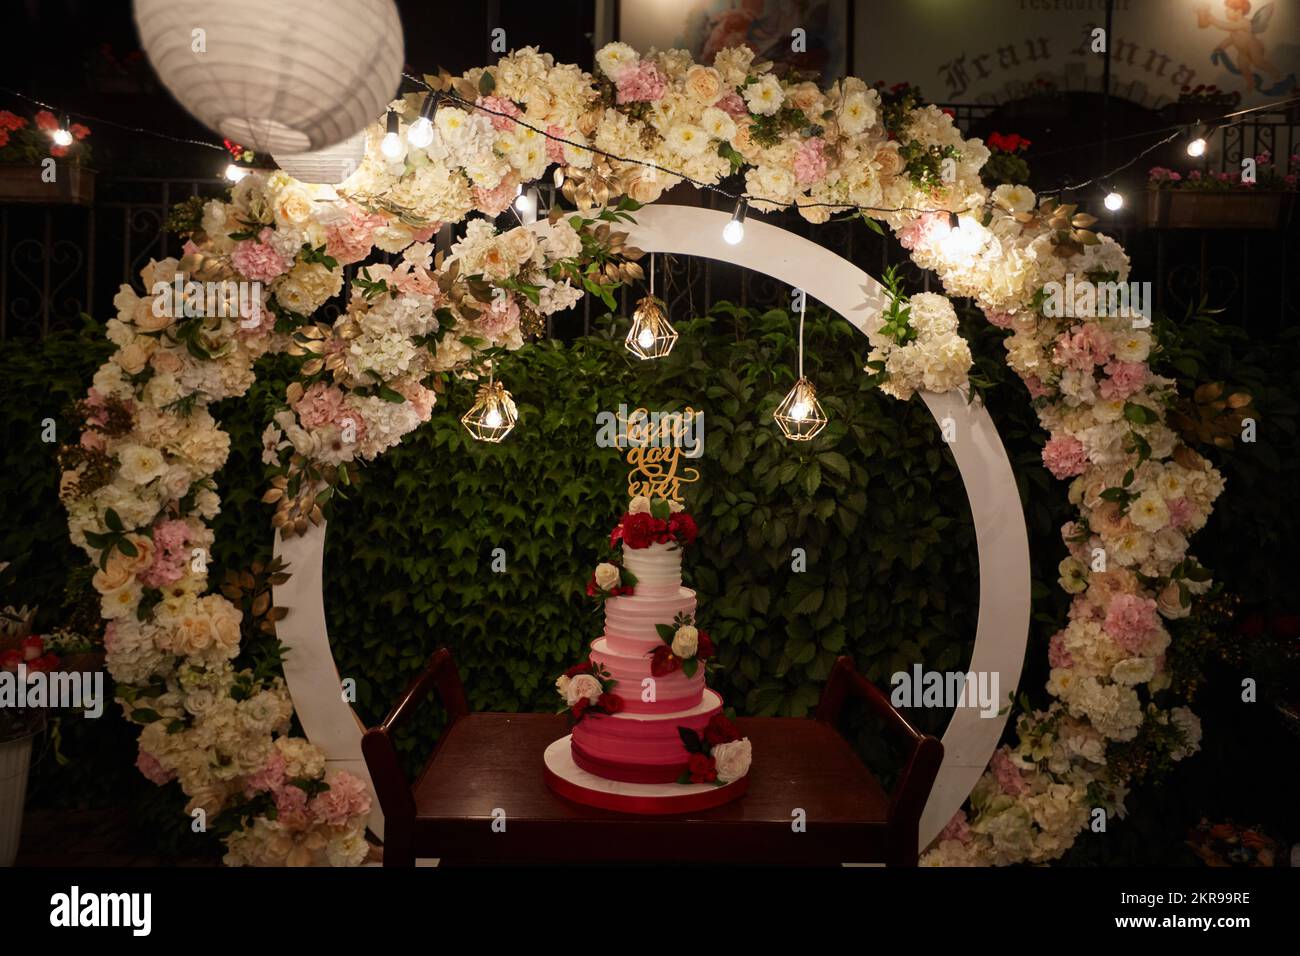 Wedding cake with best day ever sign on green garden decorated for wedding party at night. White and marsala creative decor with circle wedding arch Stock Photo